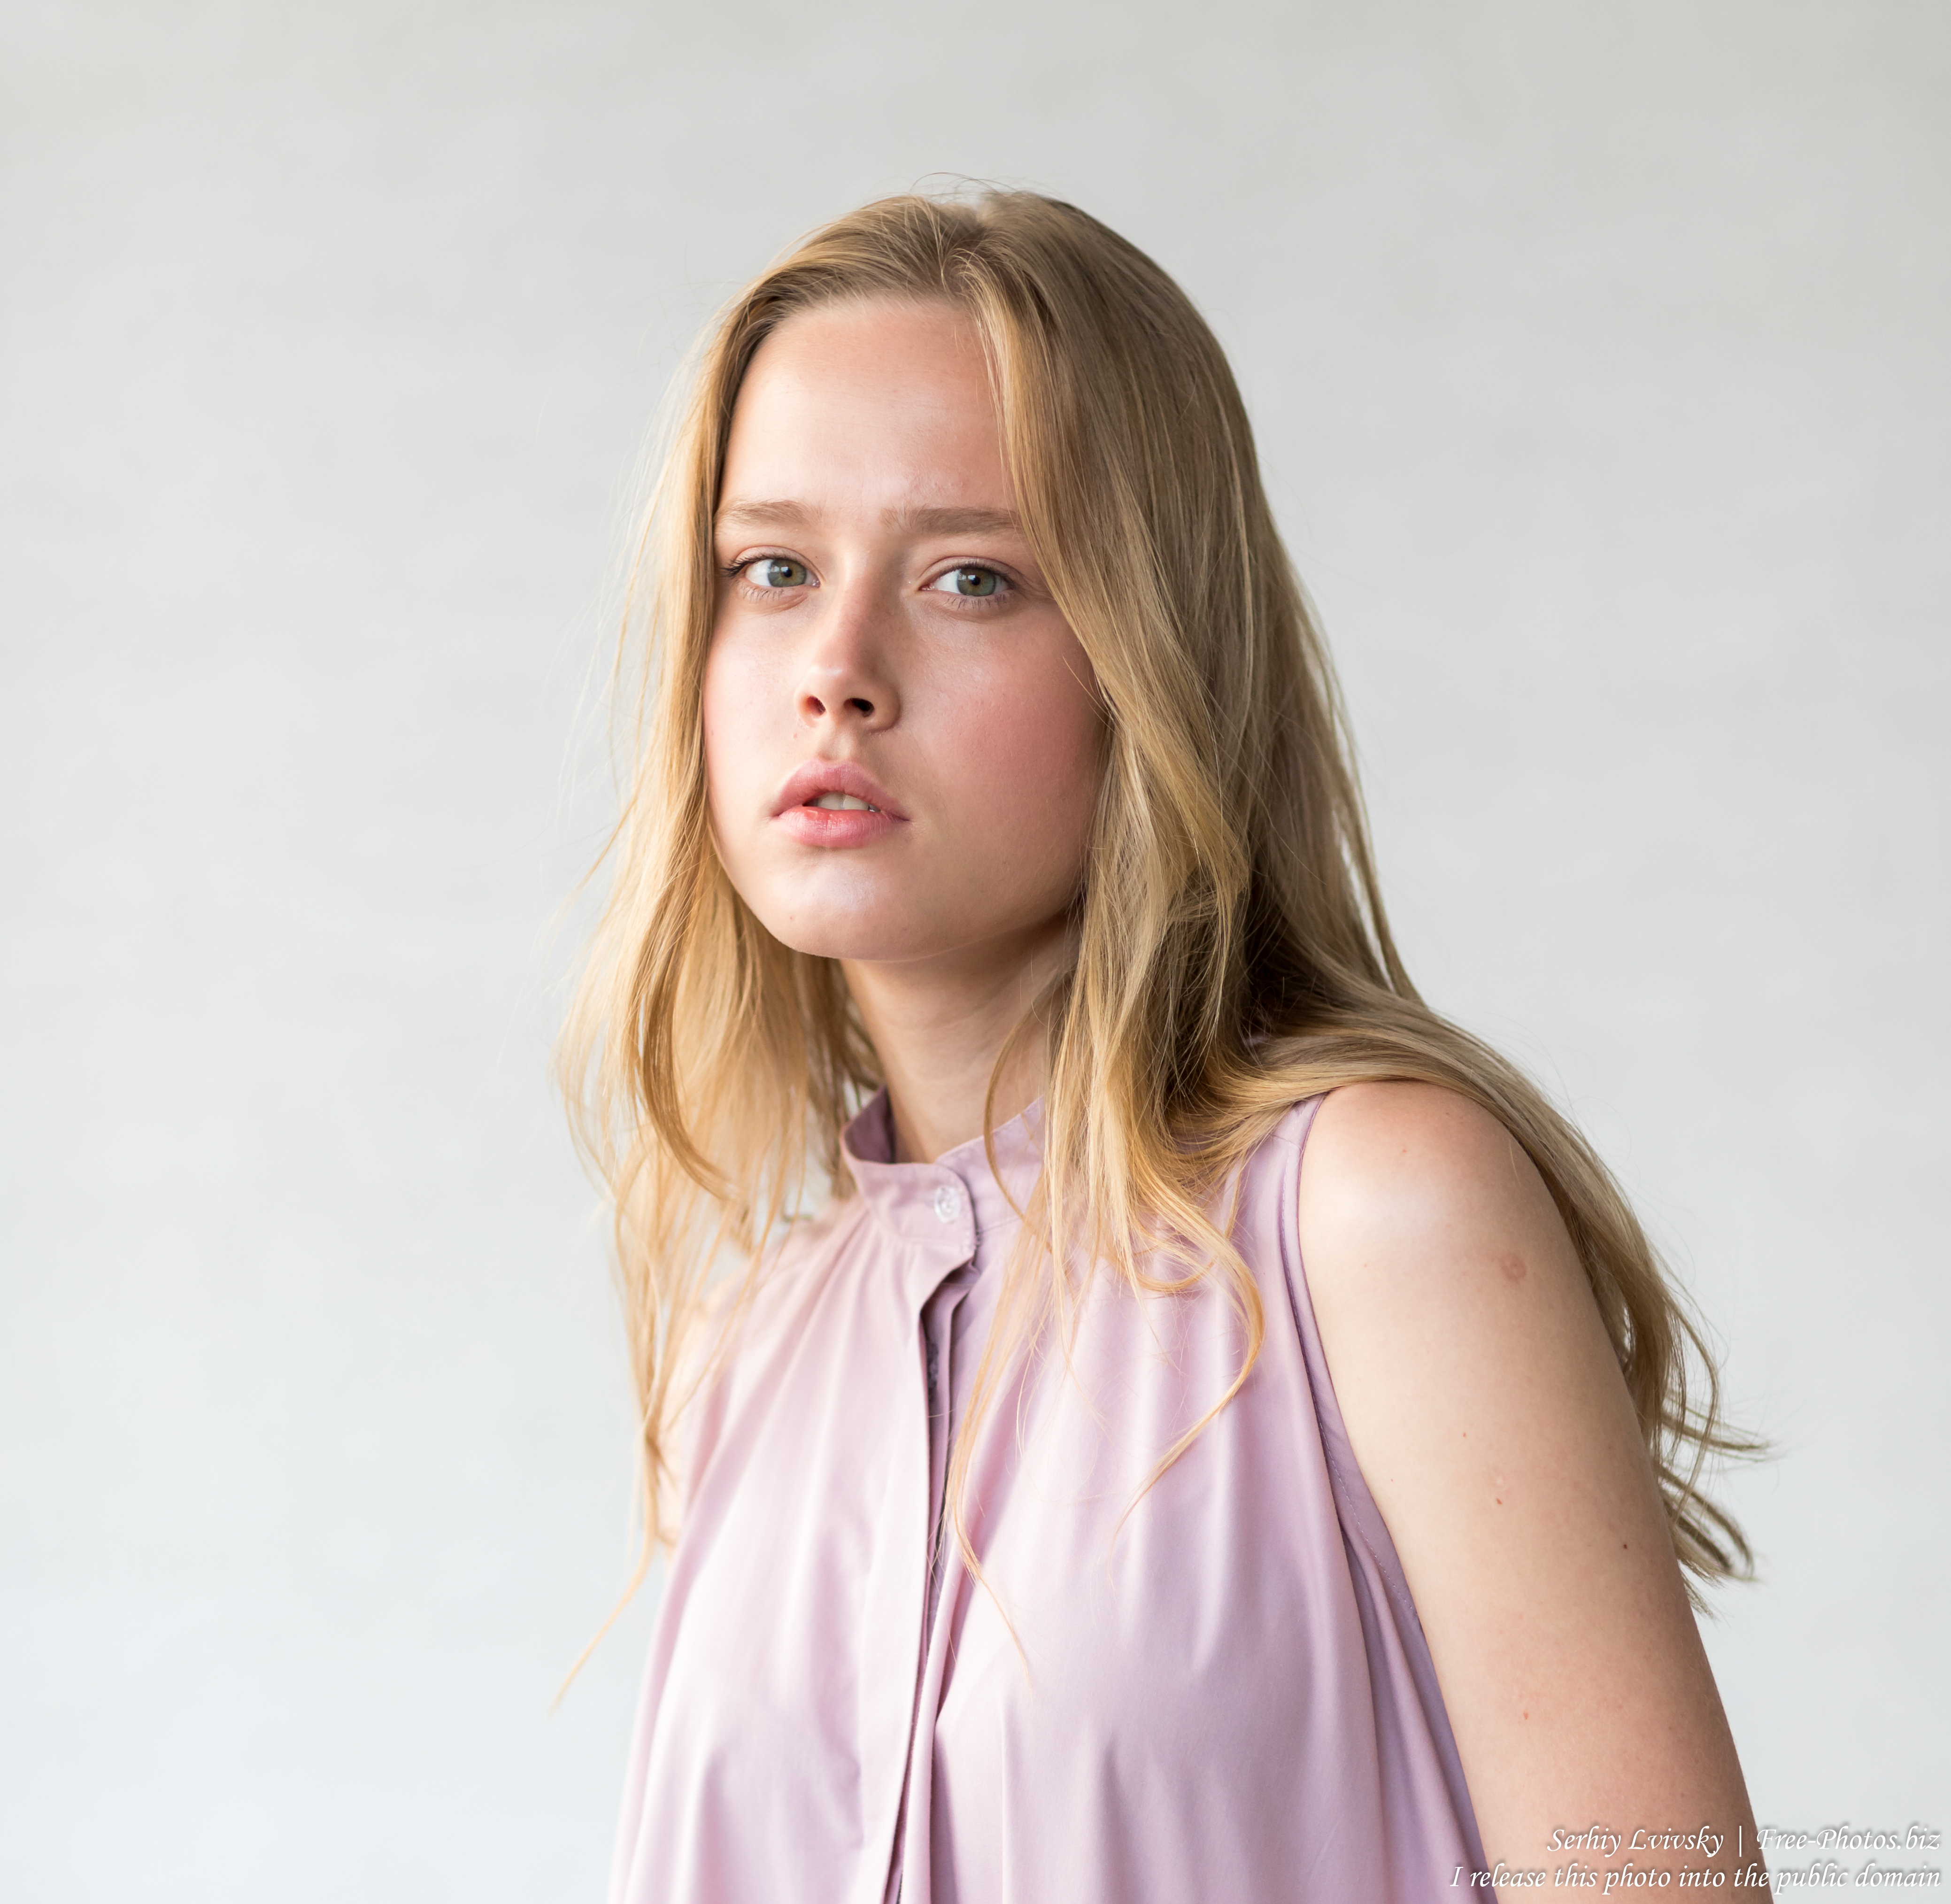 Ania - an 18-year-old natural blonde girl photographed in June 2019 by Serhiy Lvivsky, picture 1